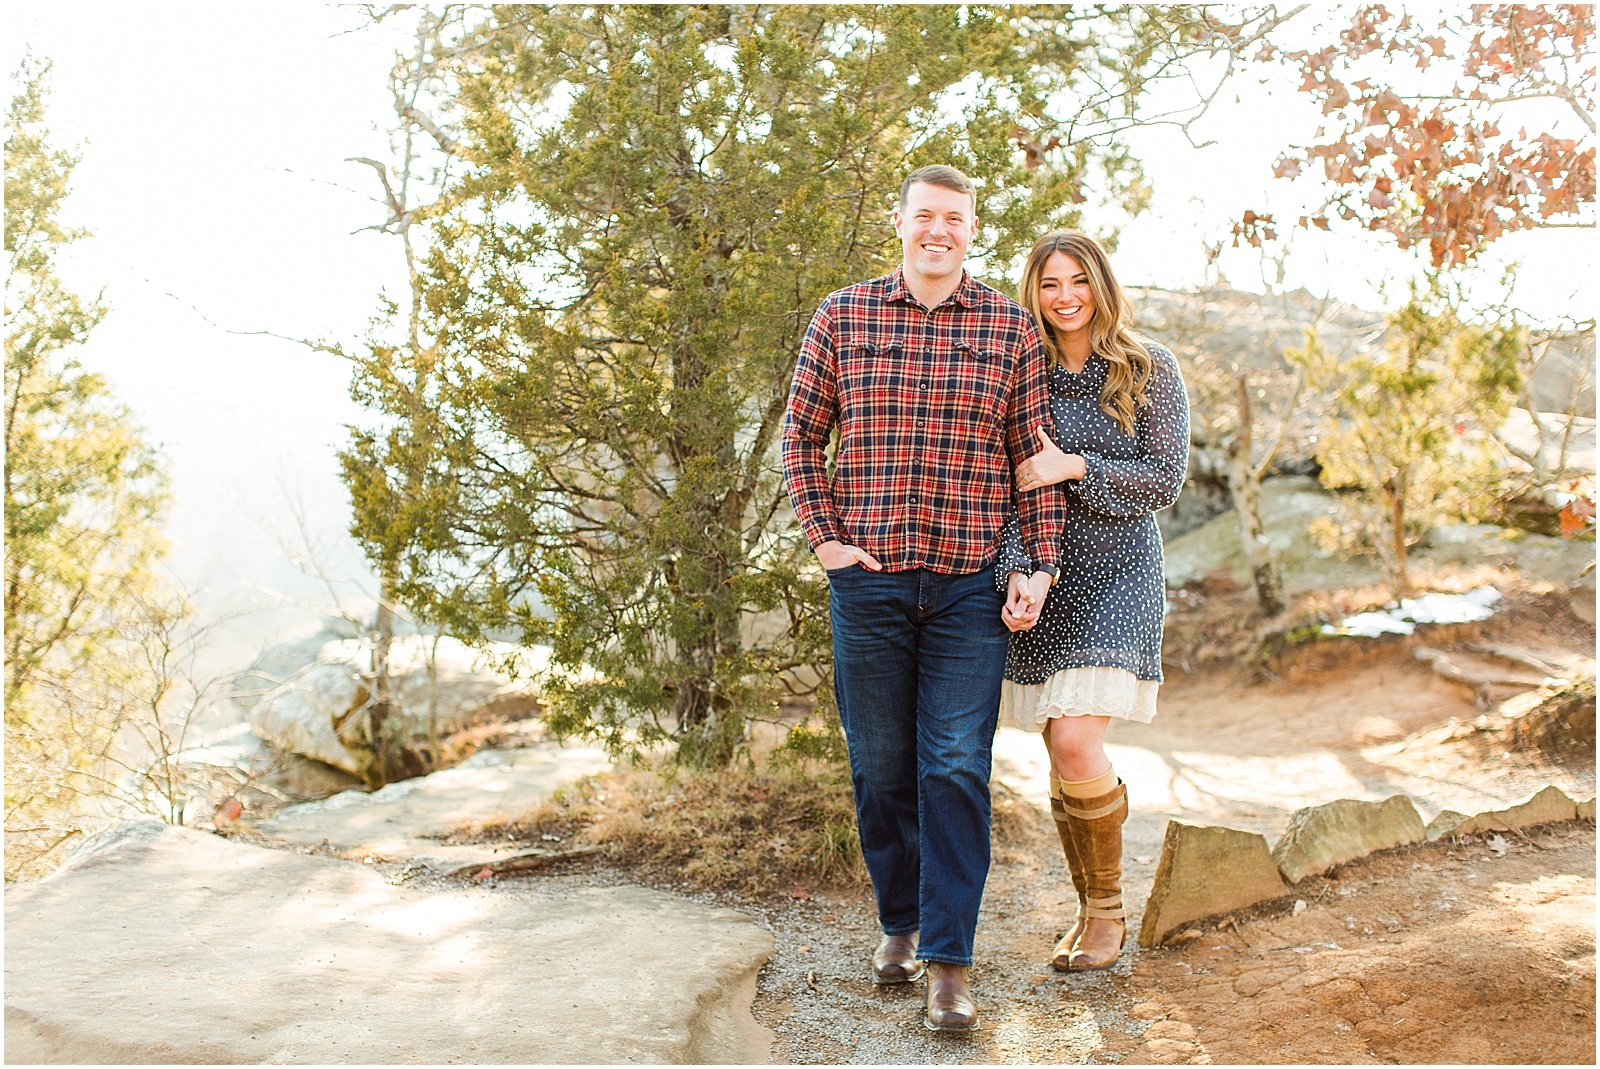 A Sunny Garden of the Gods Engagement Session | Shiloh and Lee | Bret and Brandie Photography009.jpg